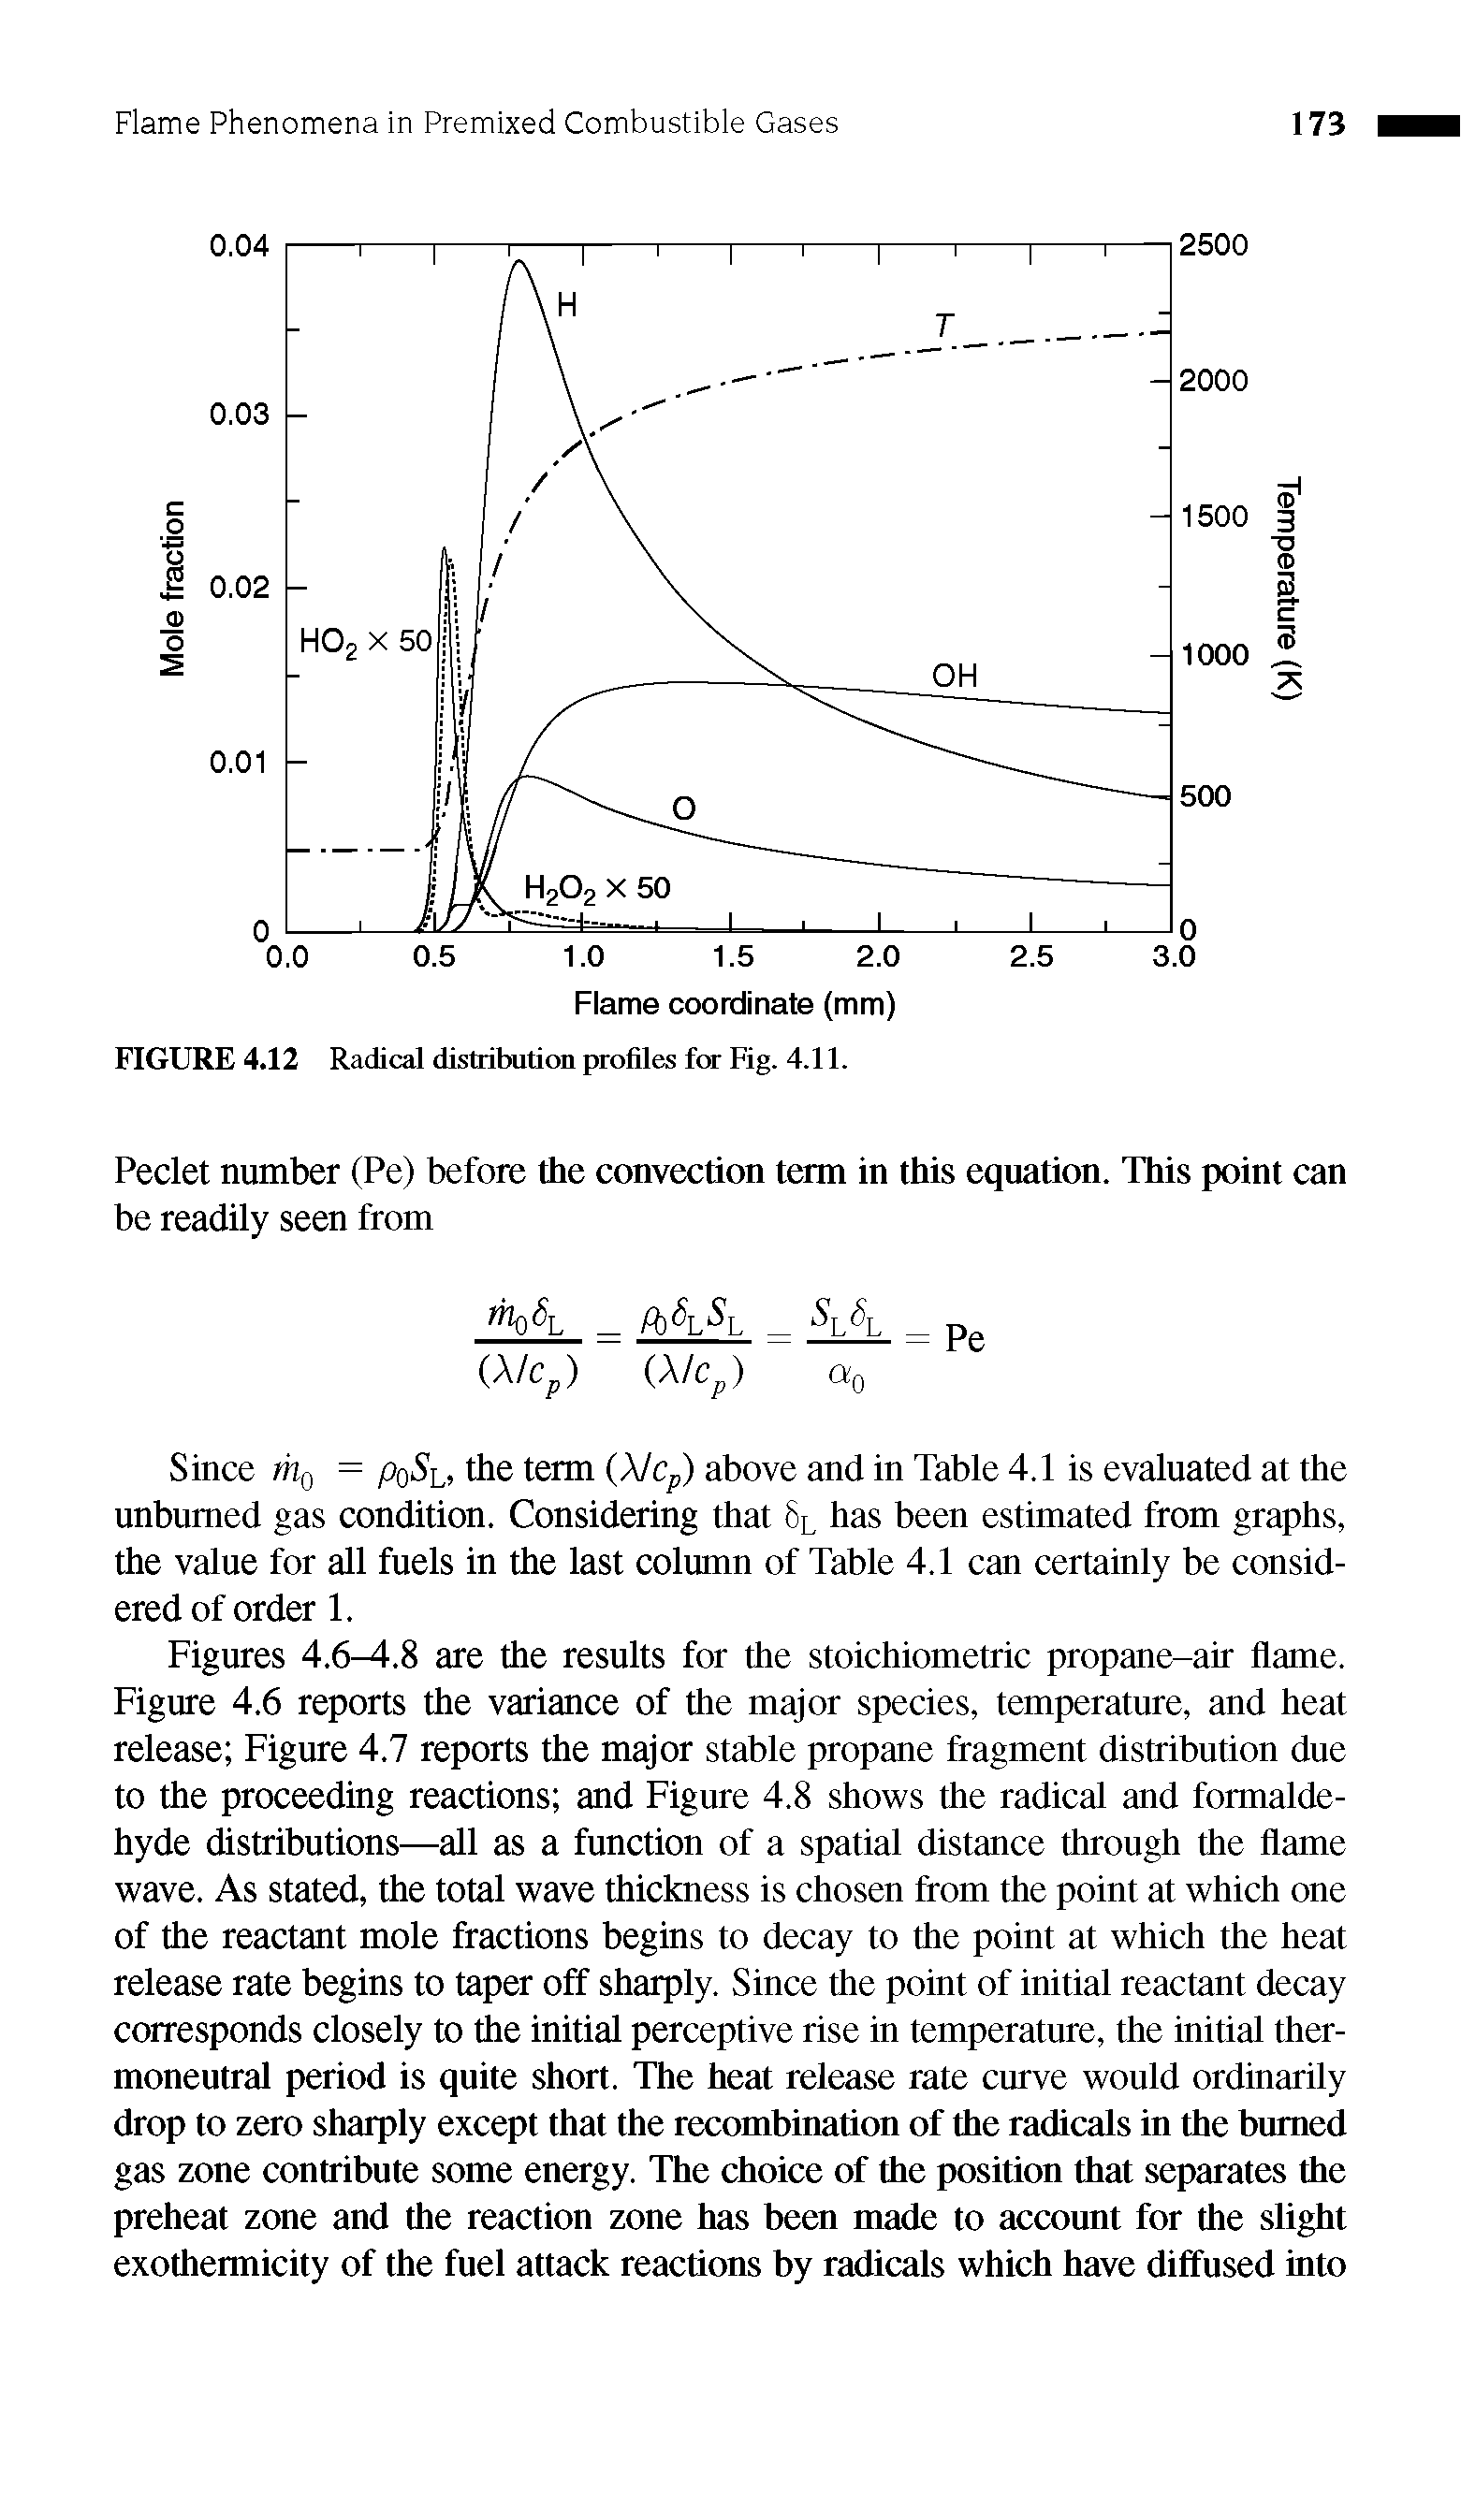 Figures 4.6—4.8 are the results for the stoichiometric propane-air flame. Figure 4.6 reports the variance of the major species, temperature, and heat release Figure 4.7 reports the major stable propane fragment distribution due to the proceeding reactions and Figure 4.8 shows the radical and formaldehyde distributions—all as a function of a spatial distance through the flame wave. As stated, the total wave thickness is chosen from the point at which one of the reactant mole fractions begins to decay to the point at which the heat release rate begins to taper off sharply. Since the point of initial reactant decay corresponds closely to the initial perceptive rise in temperature, the initial thermoneutral period is quite short. The heat release rate curve would ordinarily drop to zero sharply except that the recombination of the radicals in the burned gas zone contribute some energy. The choice of the position that separates the preheat zone and the reaction zone has been made to account for the slight exothermicity of the fuel attack reactions by radicals which have diffused into...